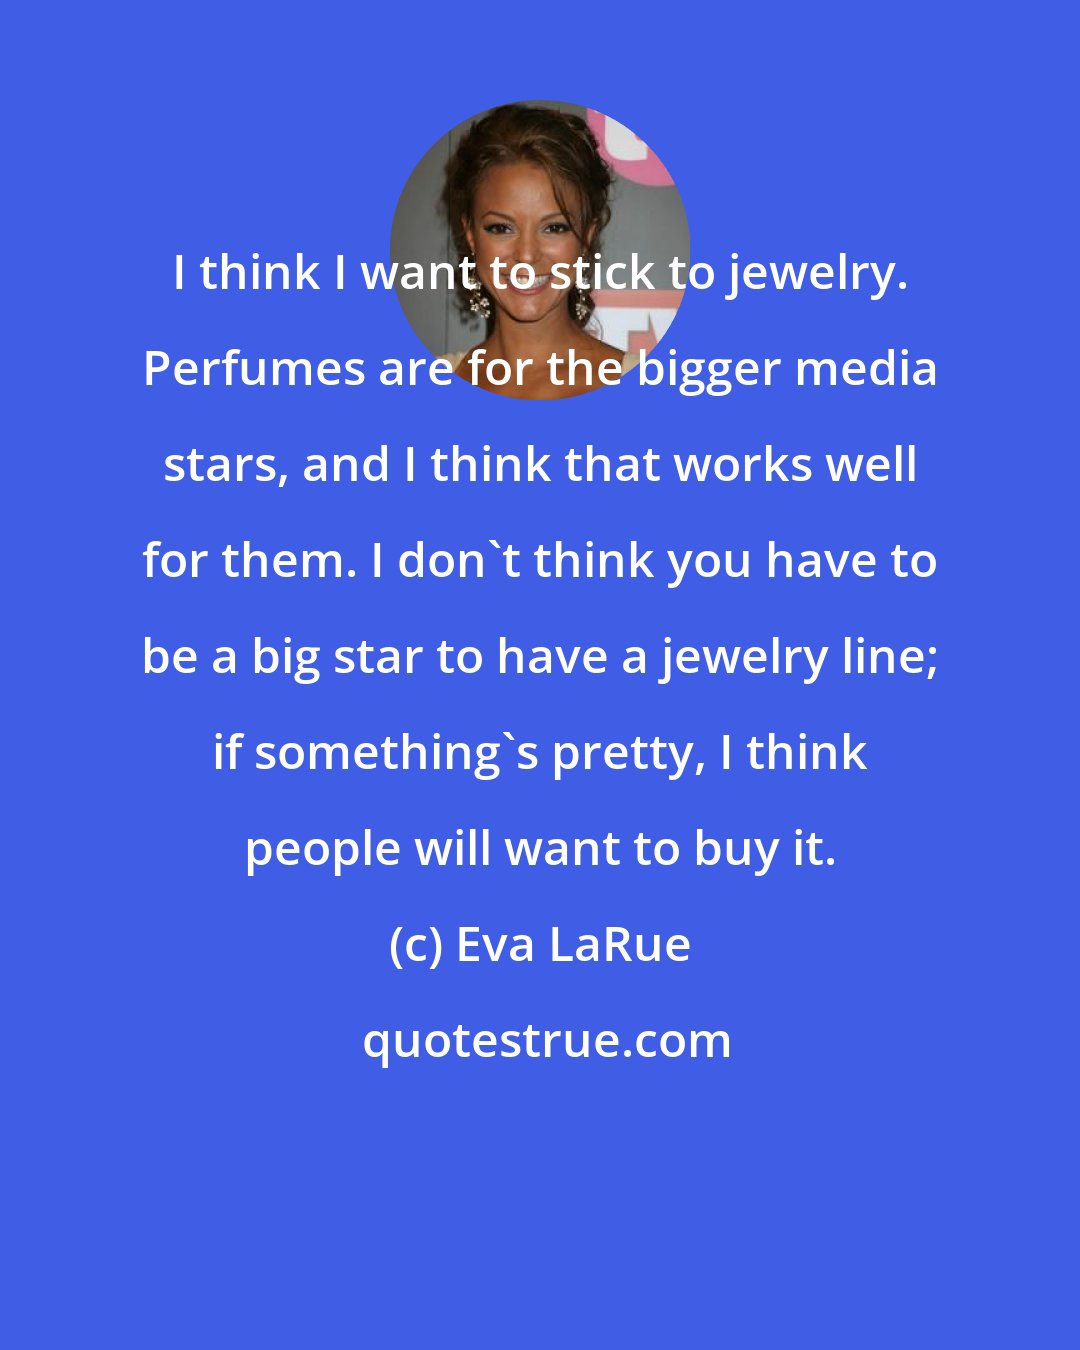 Eva LaRue: I think I want to stick to jewelry. Perfumes are for the bigger media stars, and I think that works well for them. I don't think you have to be a big star to have a jewelry line; if something's pretty, I think people will want to buy it.